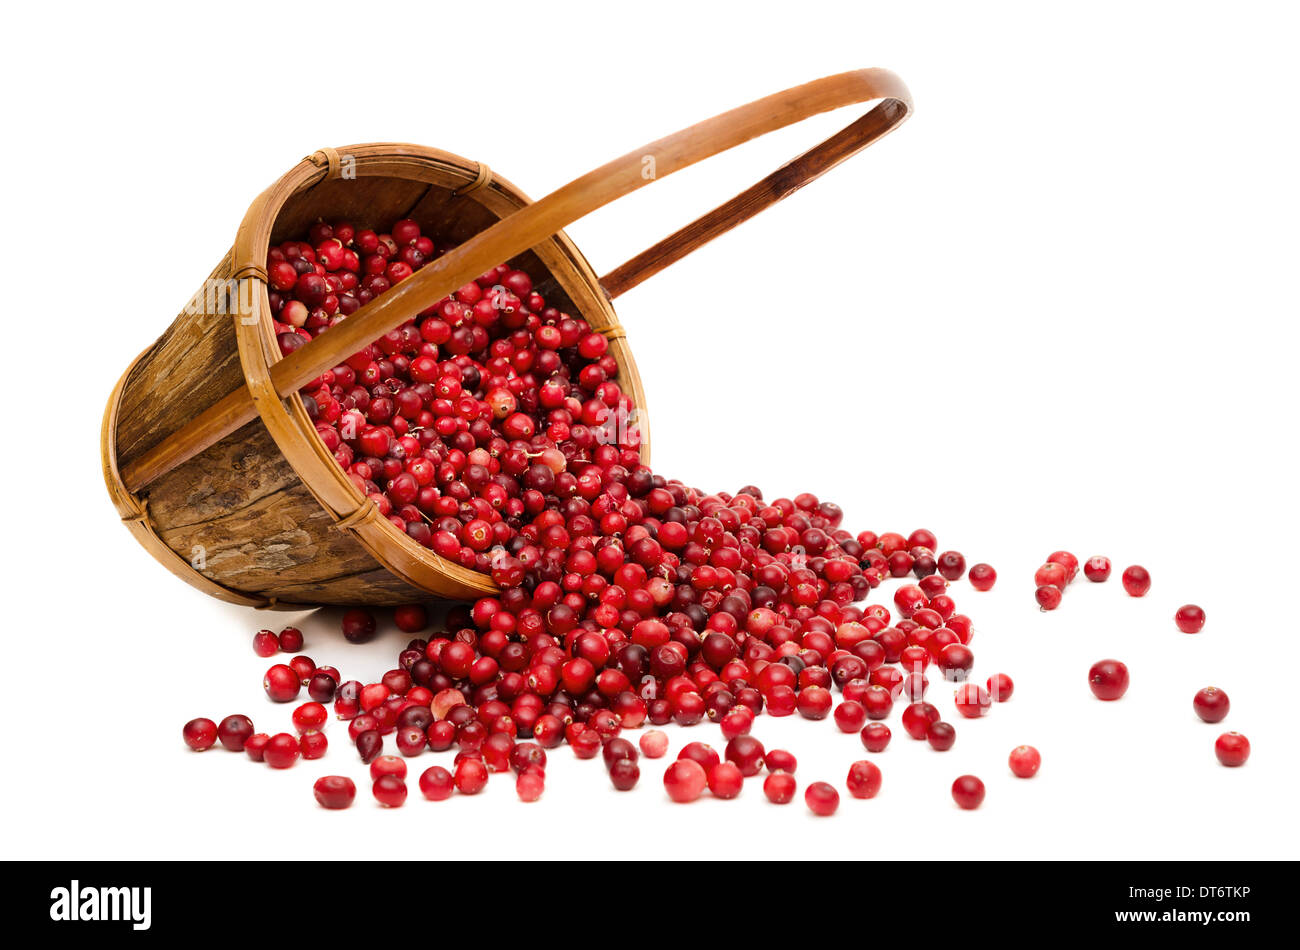 Сranberries spilling from wooden basket, isolated on white background Stock Photo